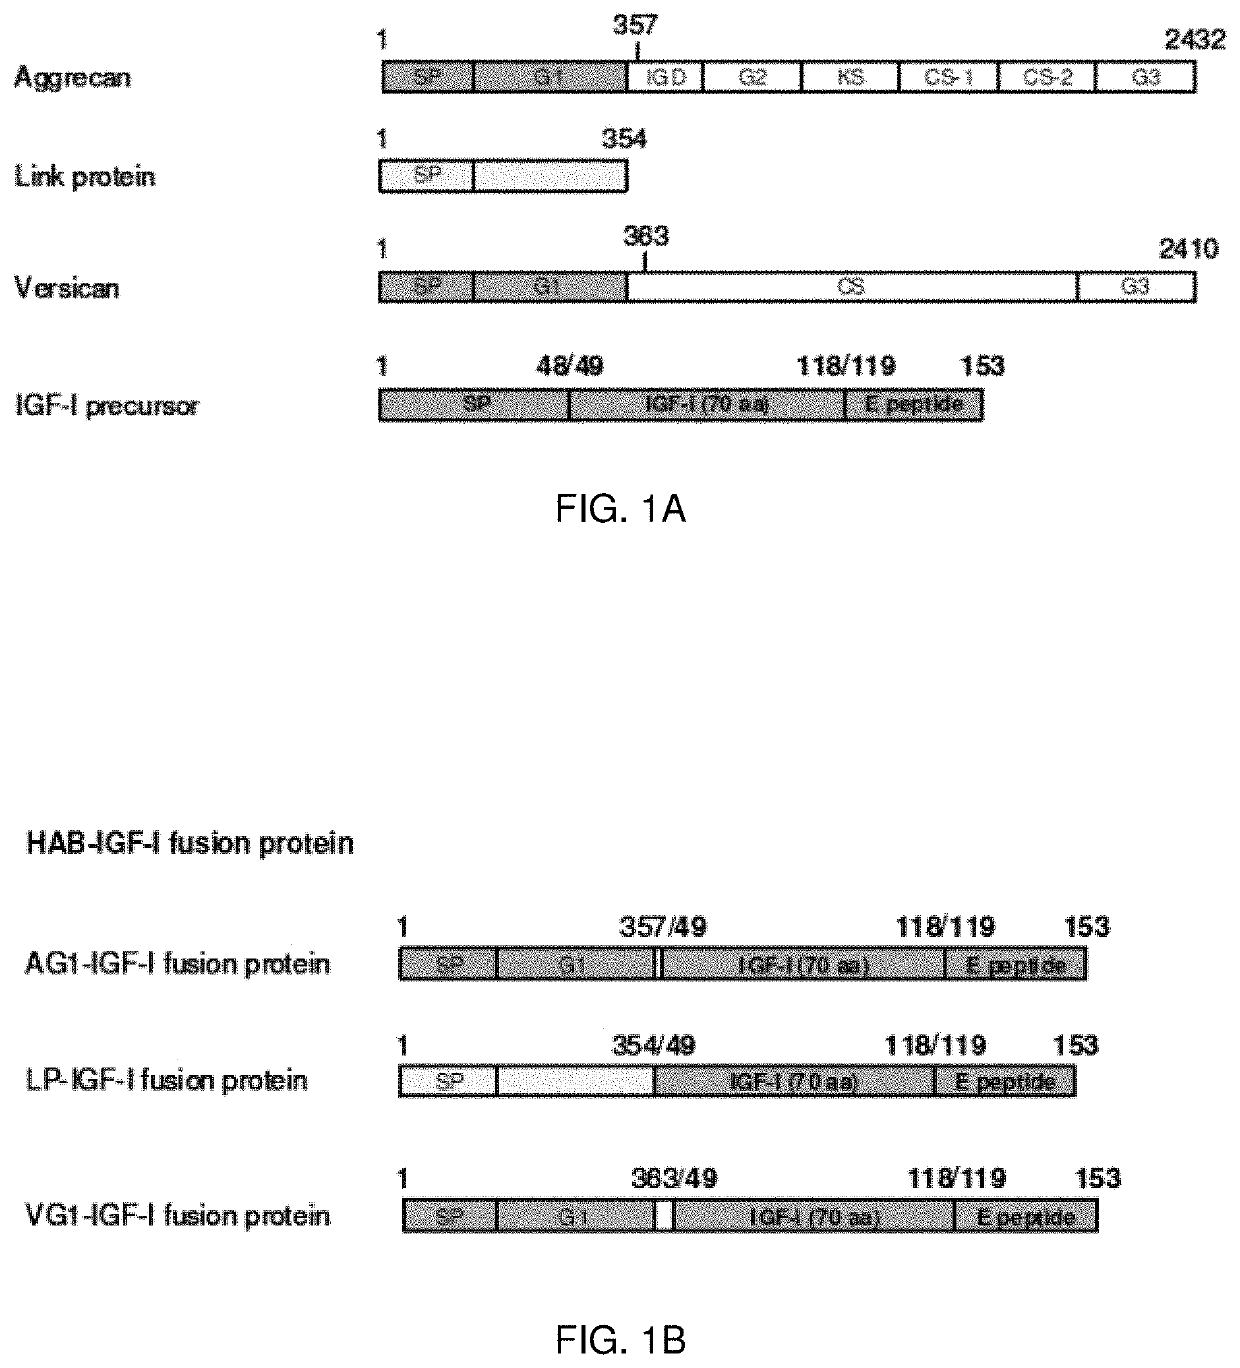 Hyaluronic Acid Binding Domain-Growth Factor Fusion Protein cDNAs and Fusion Proteins for Cartilage Matrix Preservation and Report